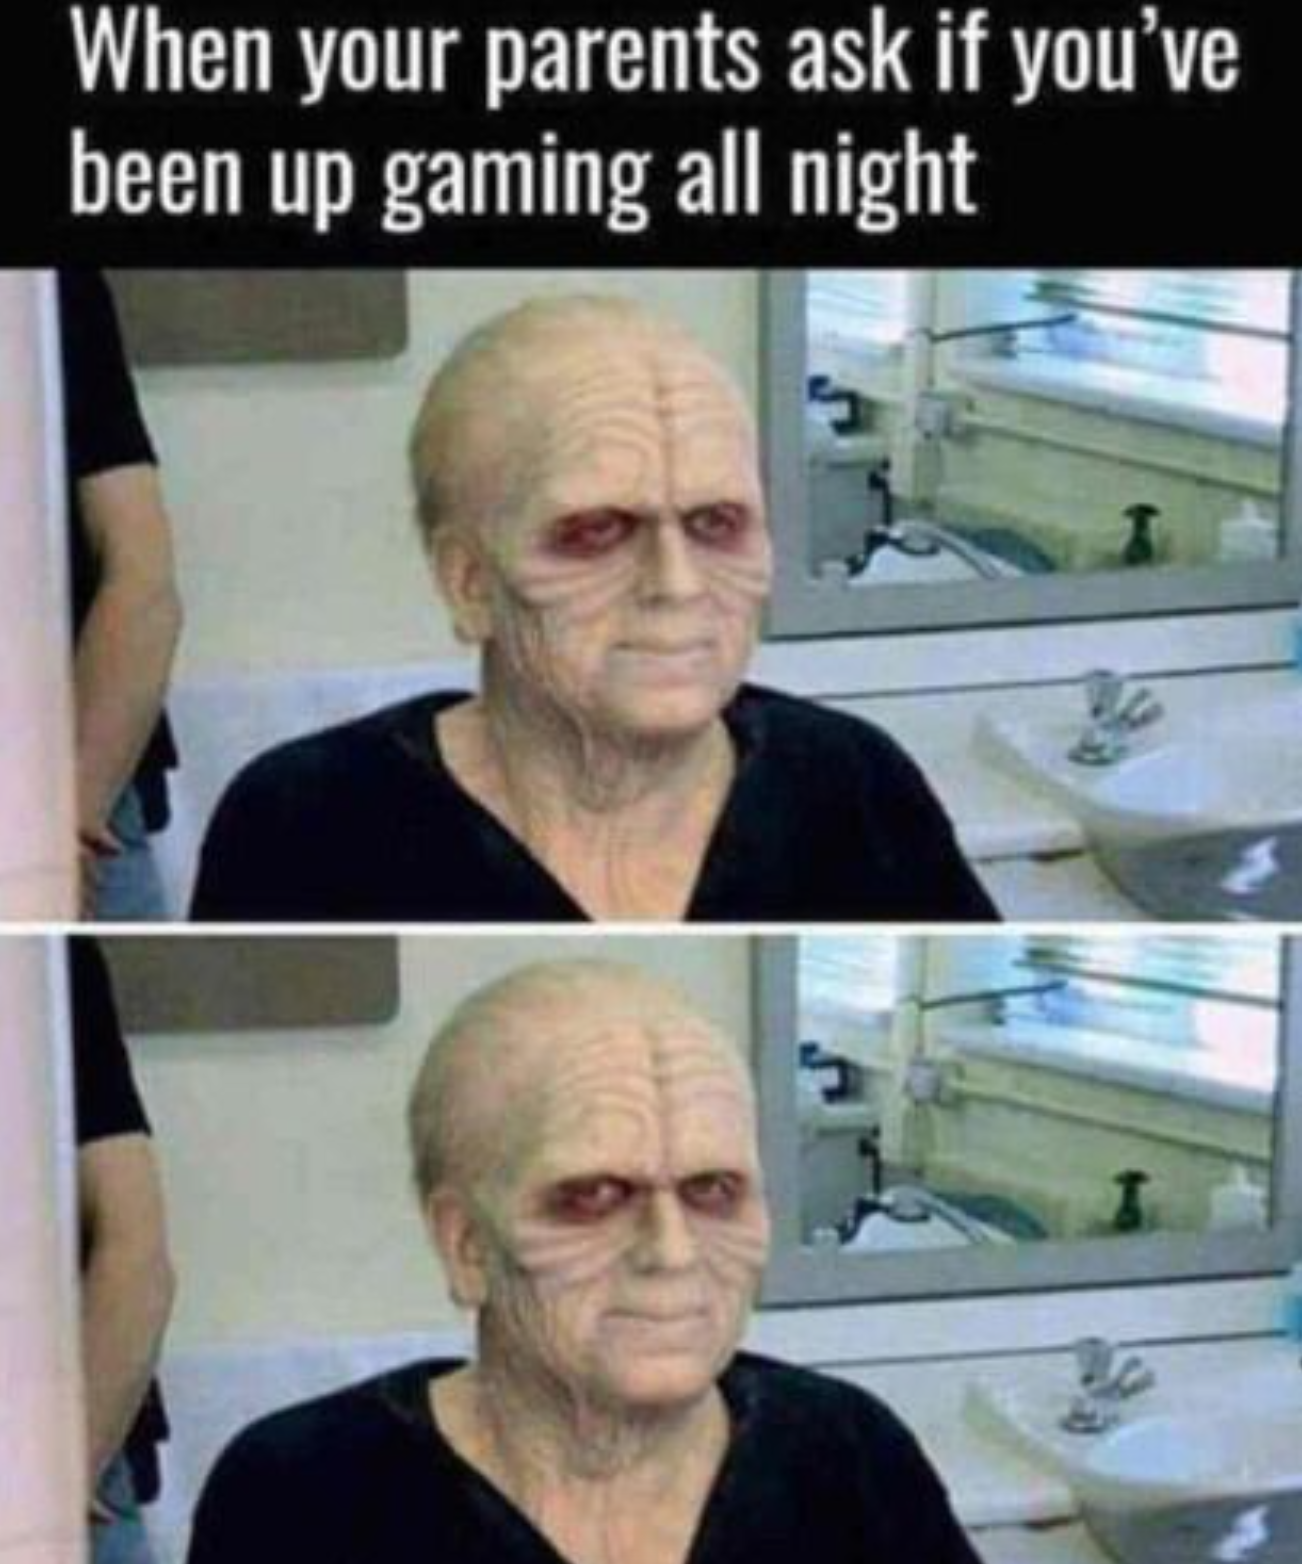 funny gaming memes - gamer memes - When your parents ask if you've been up gaming all night